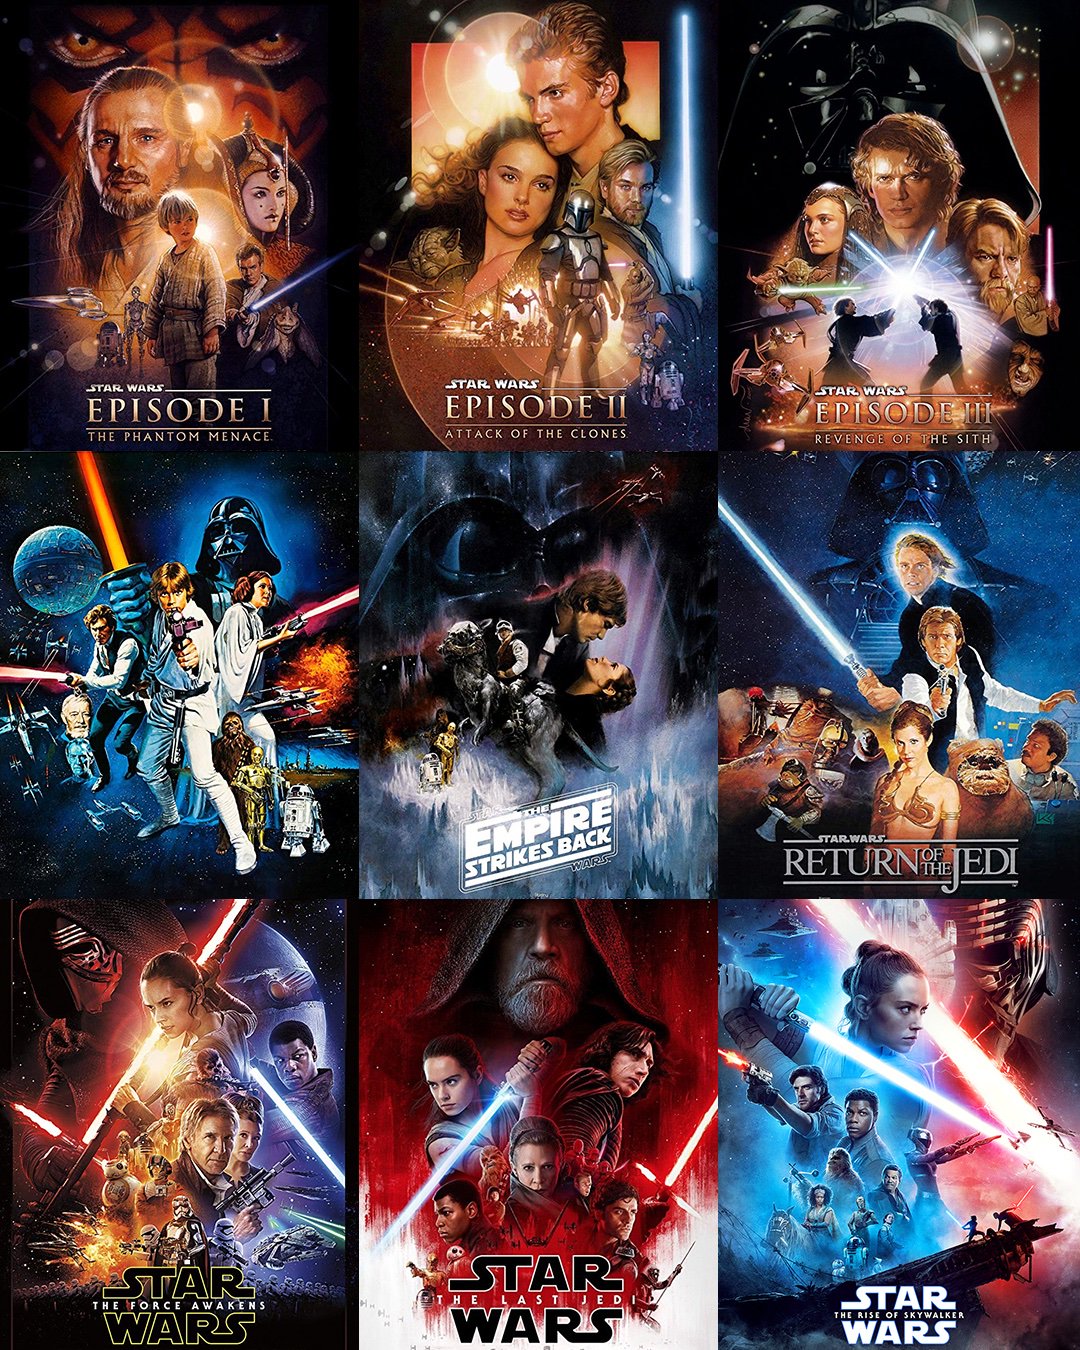 how long are all 9 star wars movies combined?